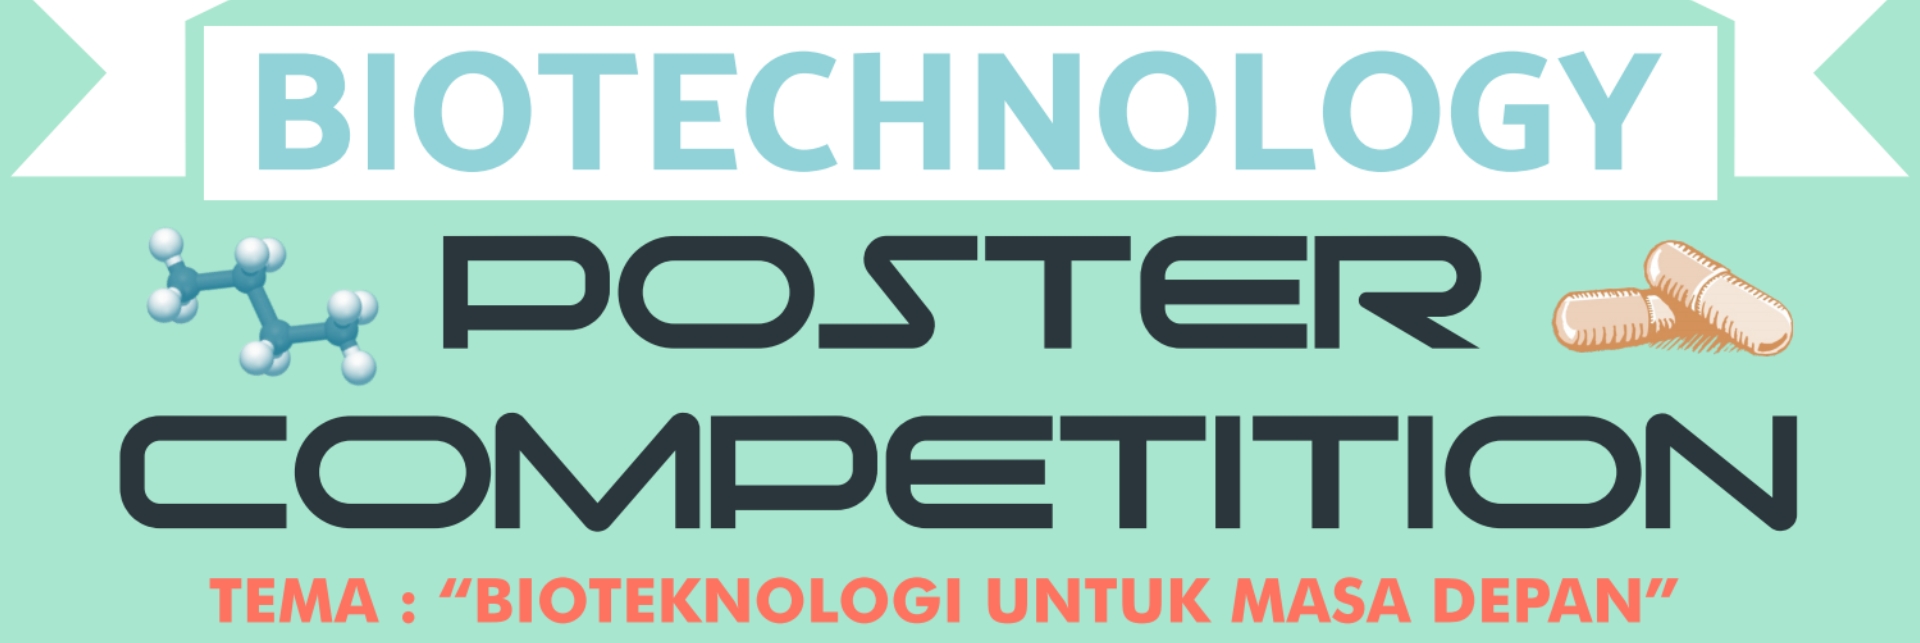 BIOTECHNOLOGY POSTER COMPETITION